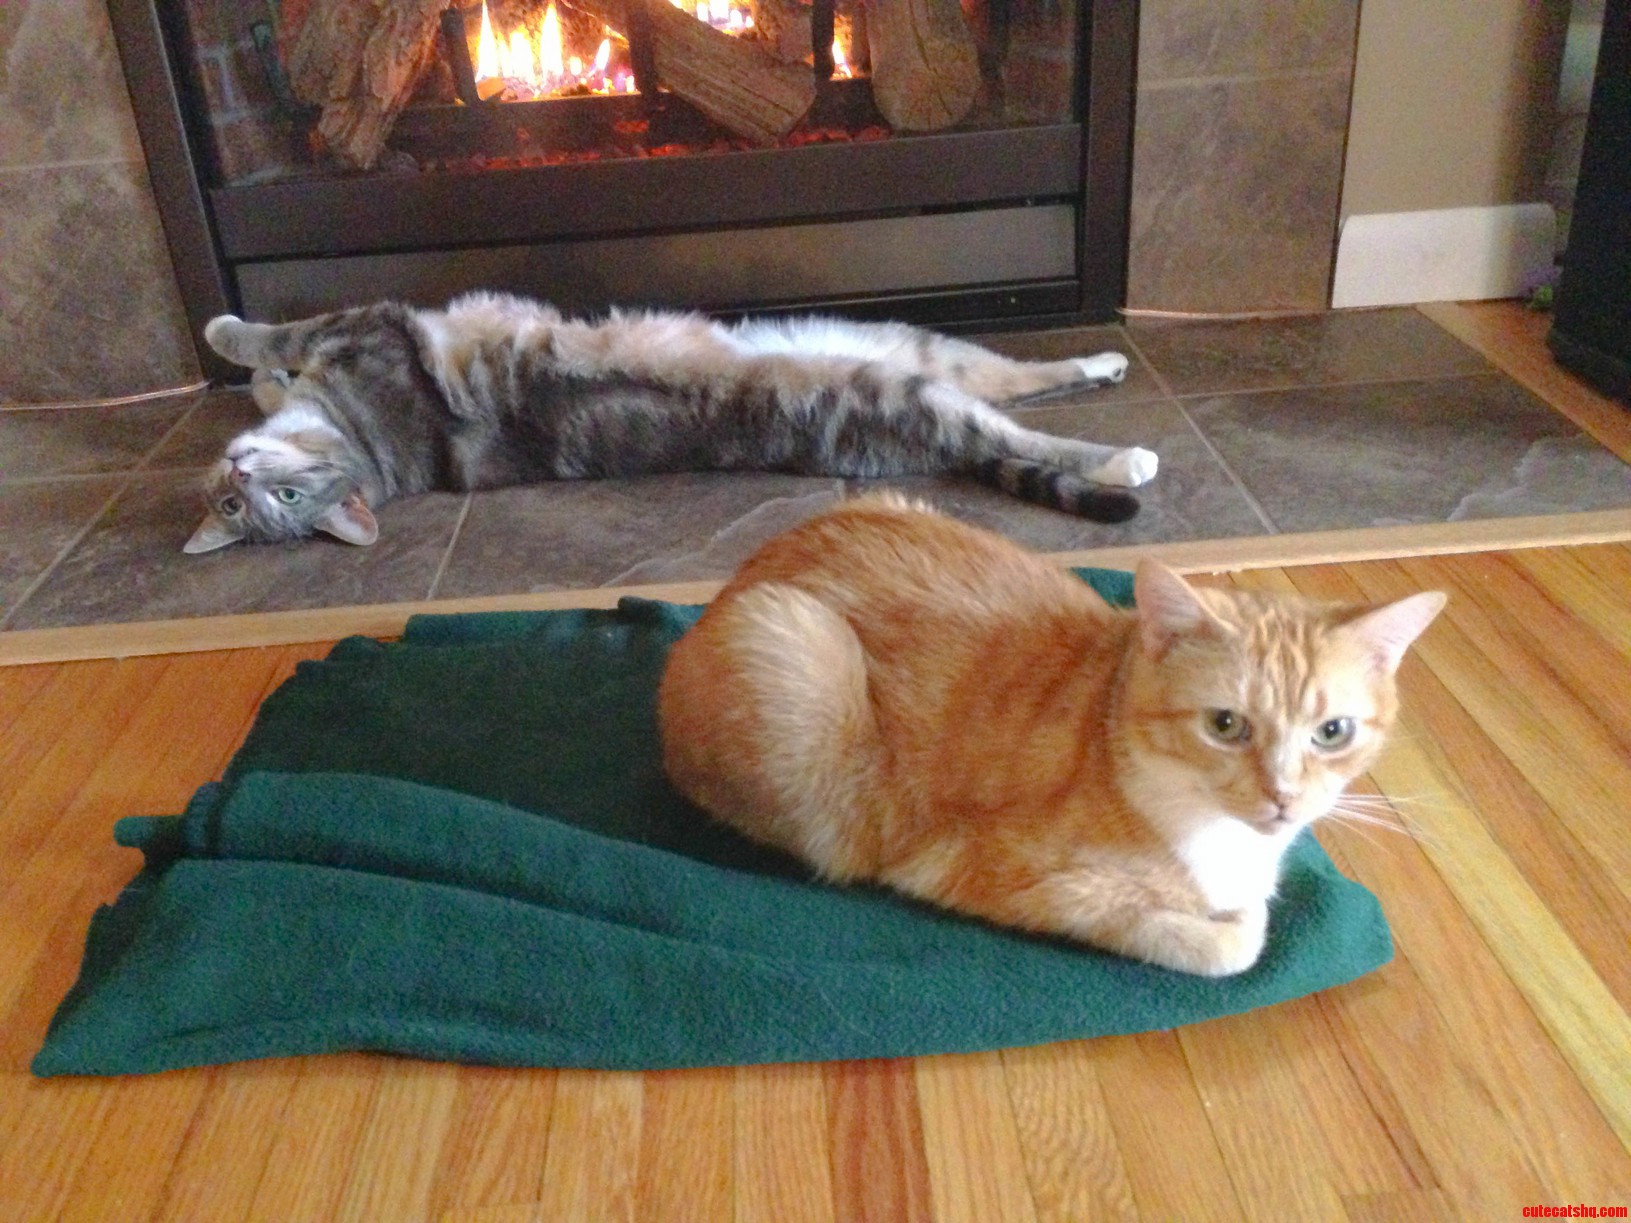 Just Spreading Out Next To The Fire